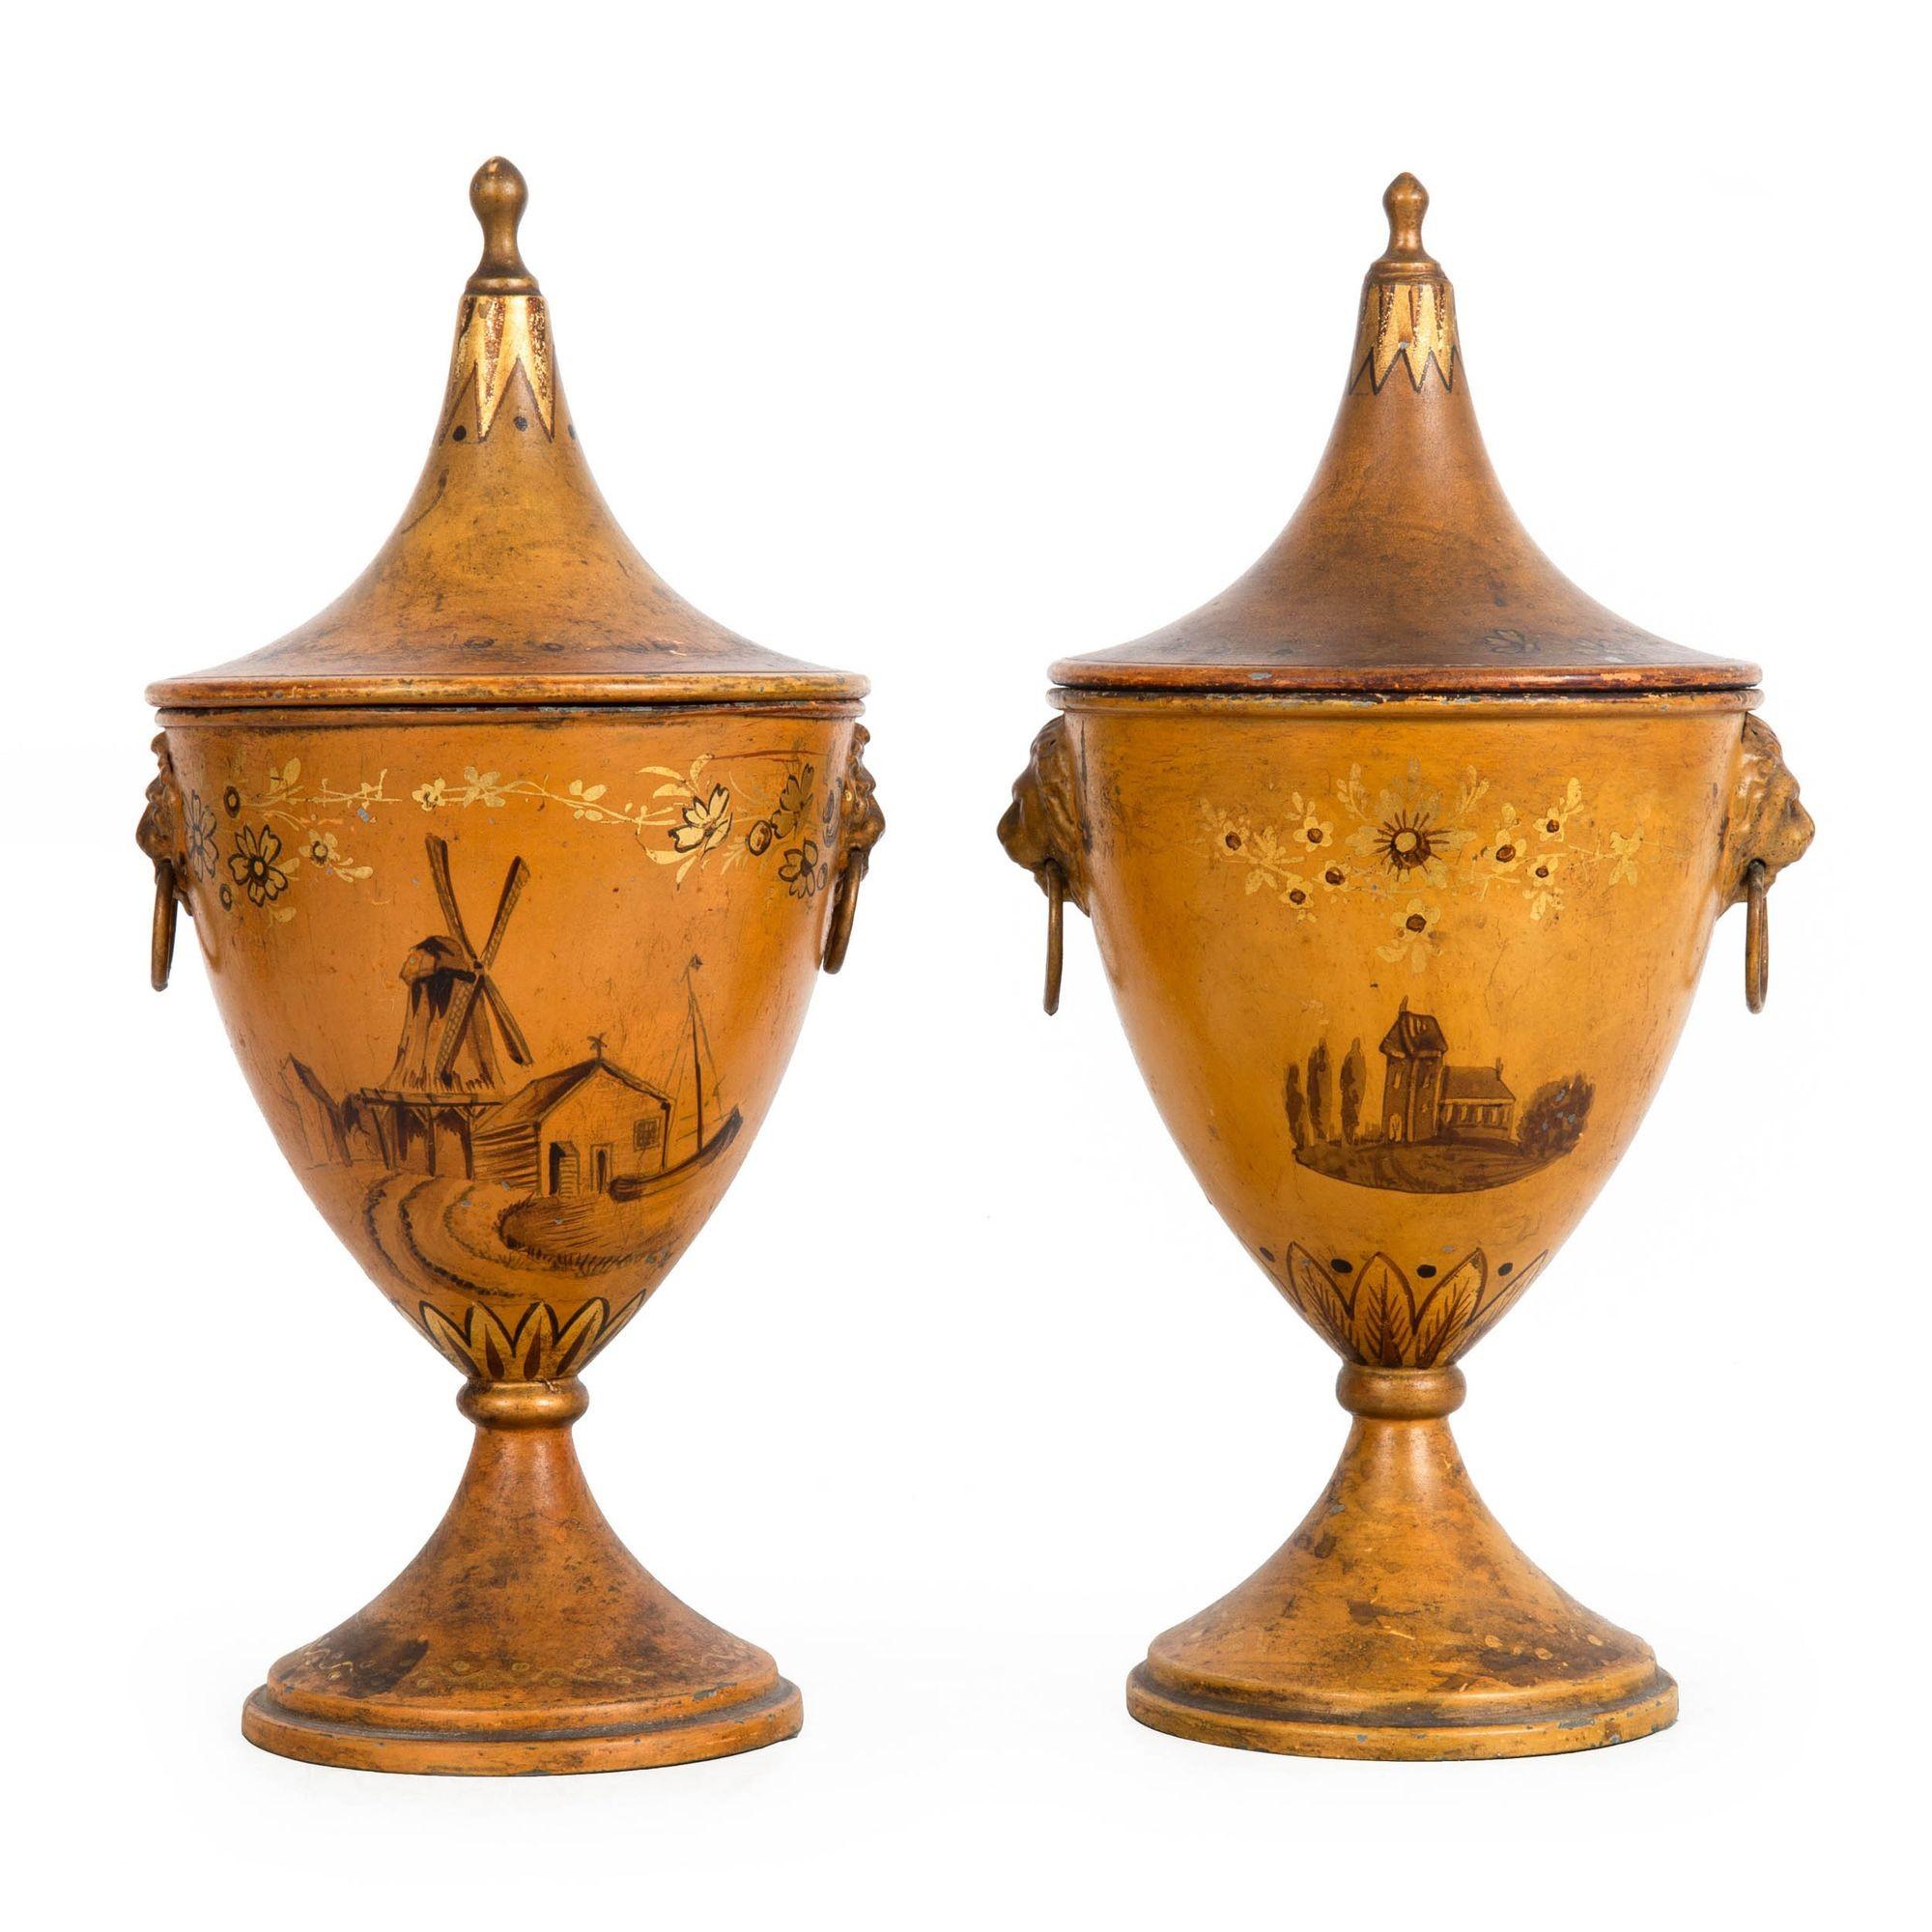 Fine 19th Century Near-Pair of Regency Tole-Painted Chestnut Urns In Good Condition For Sale In Shippensburg, PA